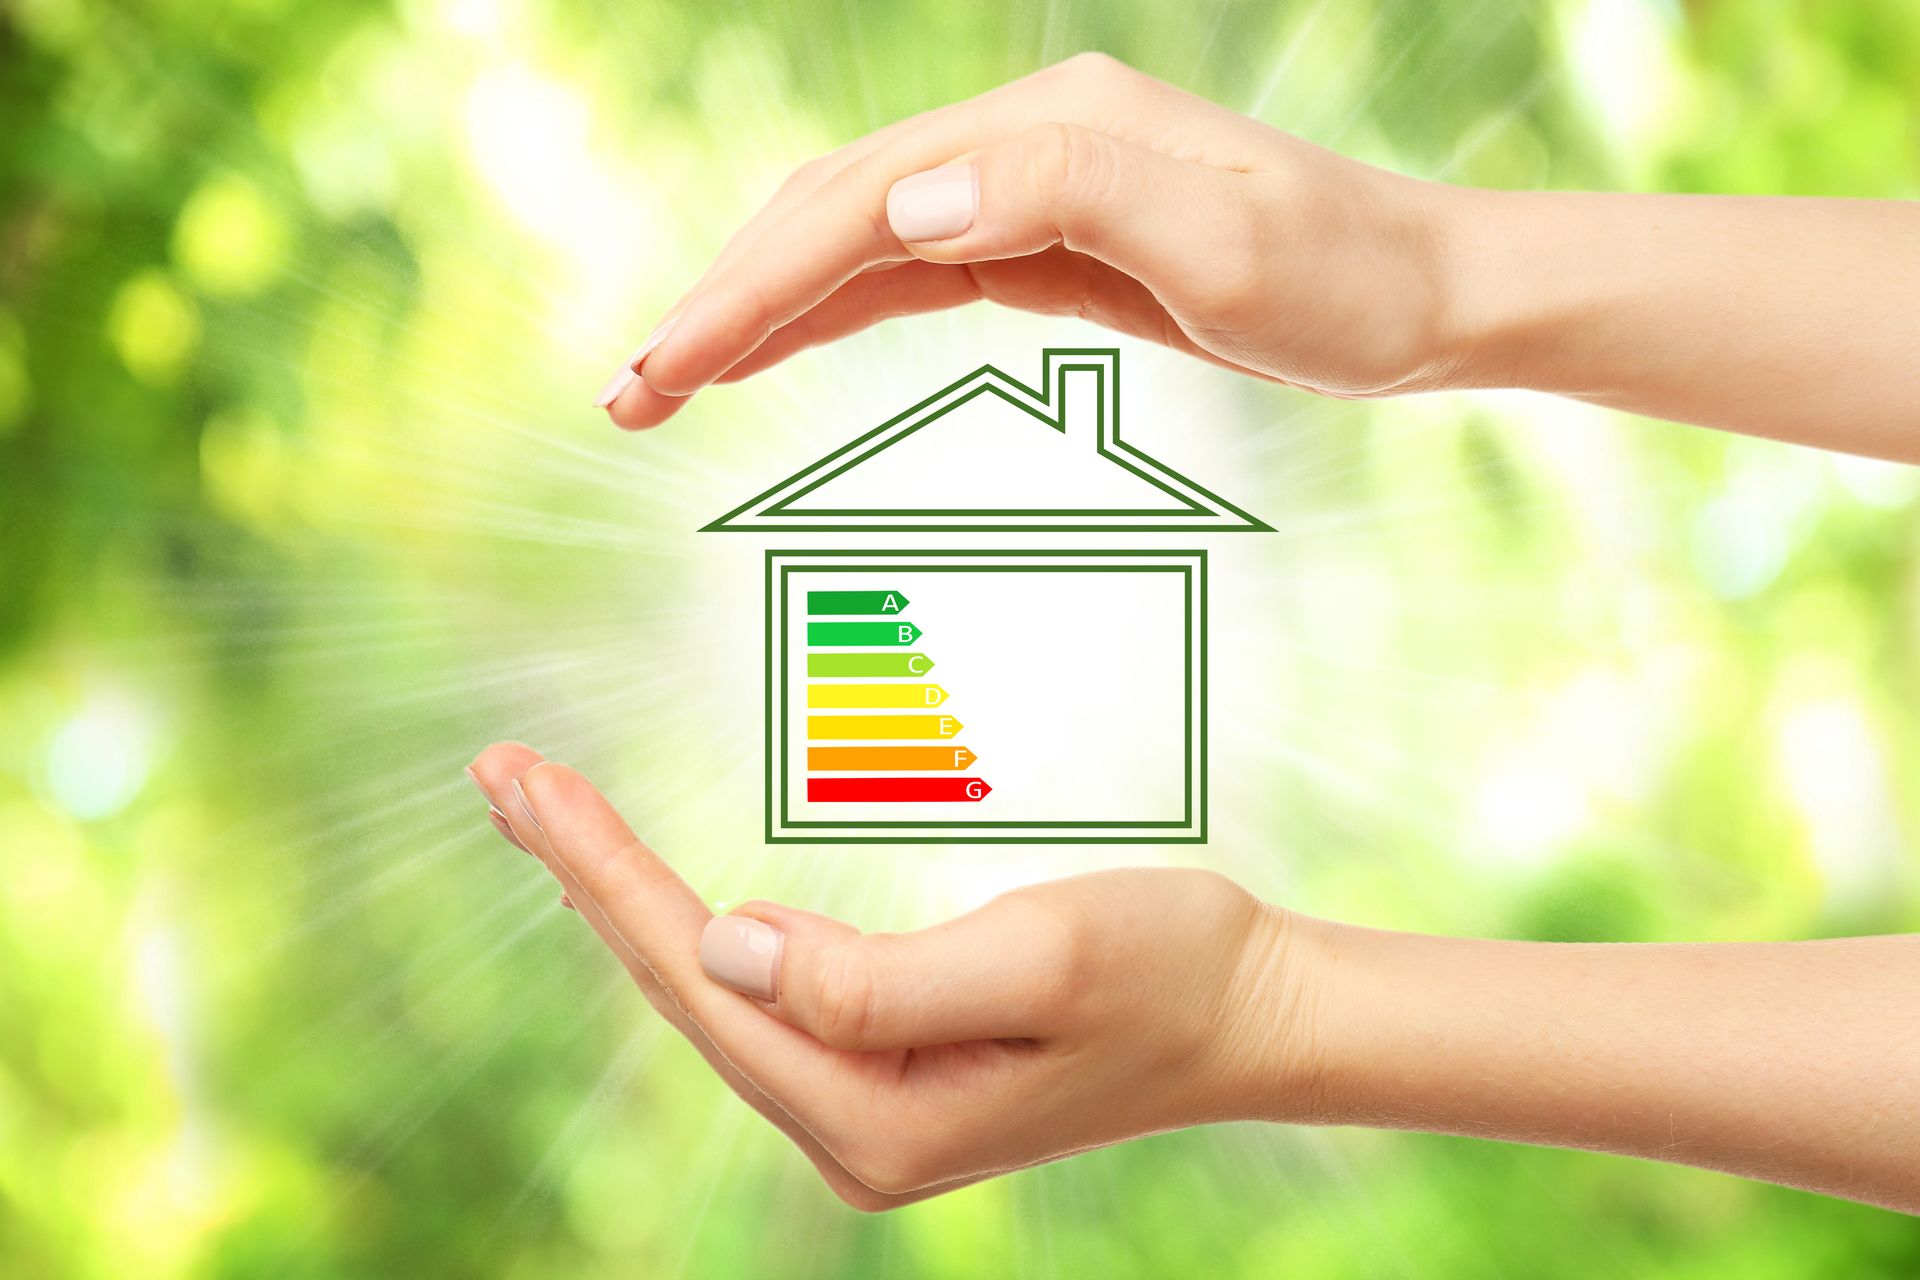 Energy efficiency is a win-win for homeowners and home builders